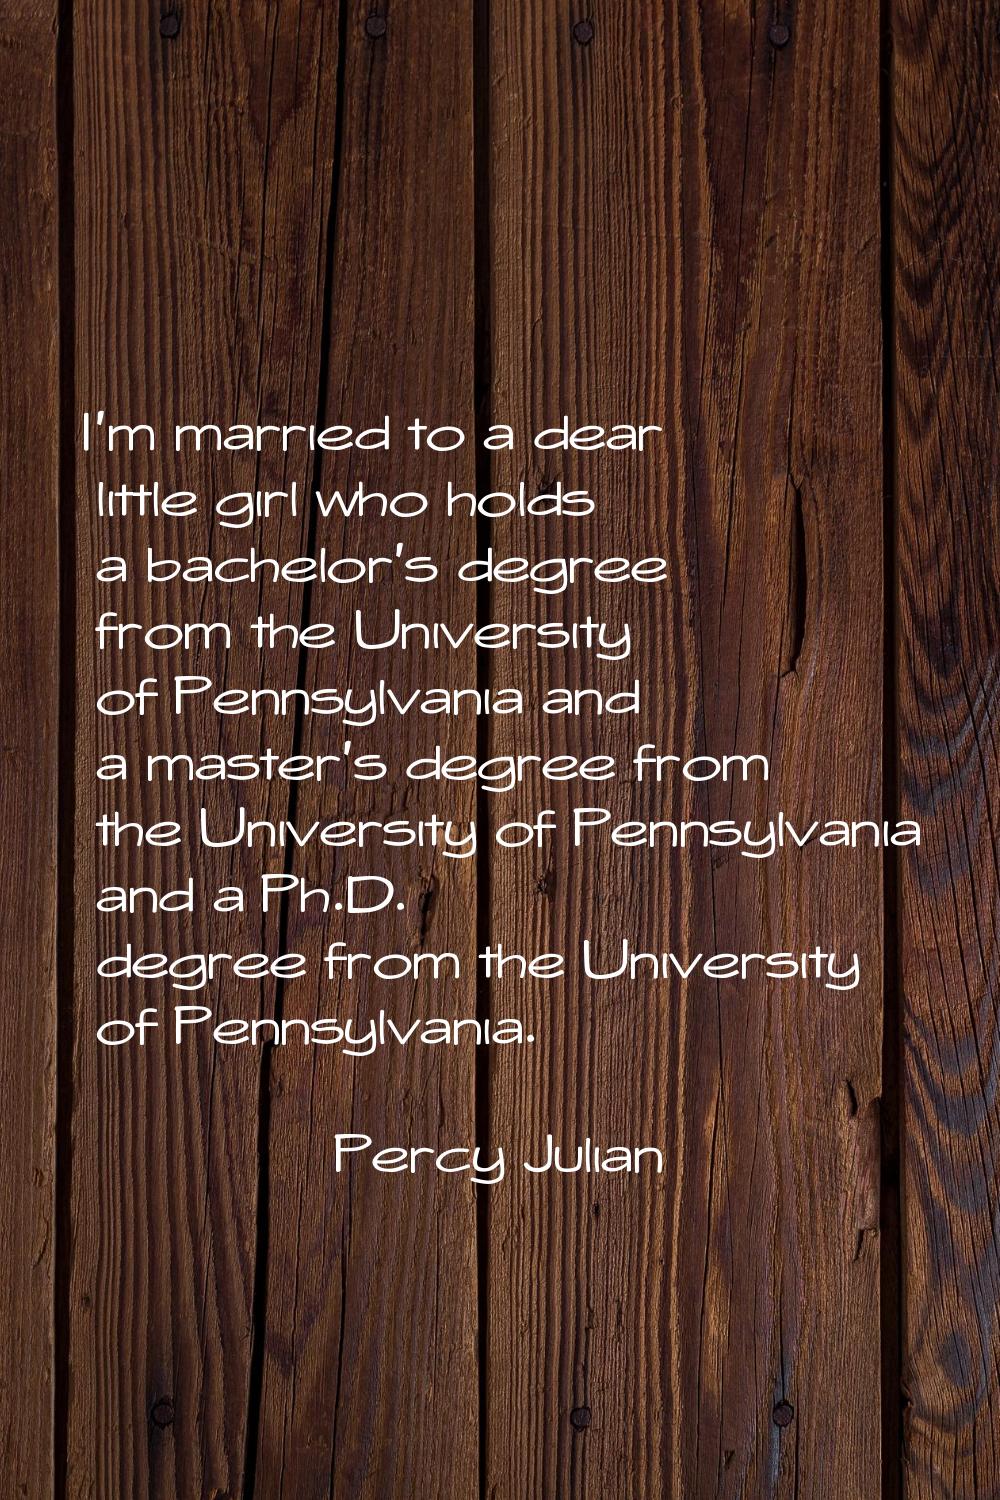 I'm married to a dear little girl who holds a bachelor's degree from the University of Pennsylvania